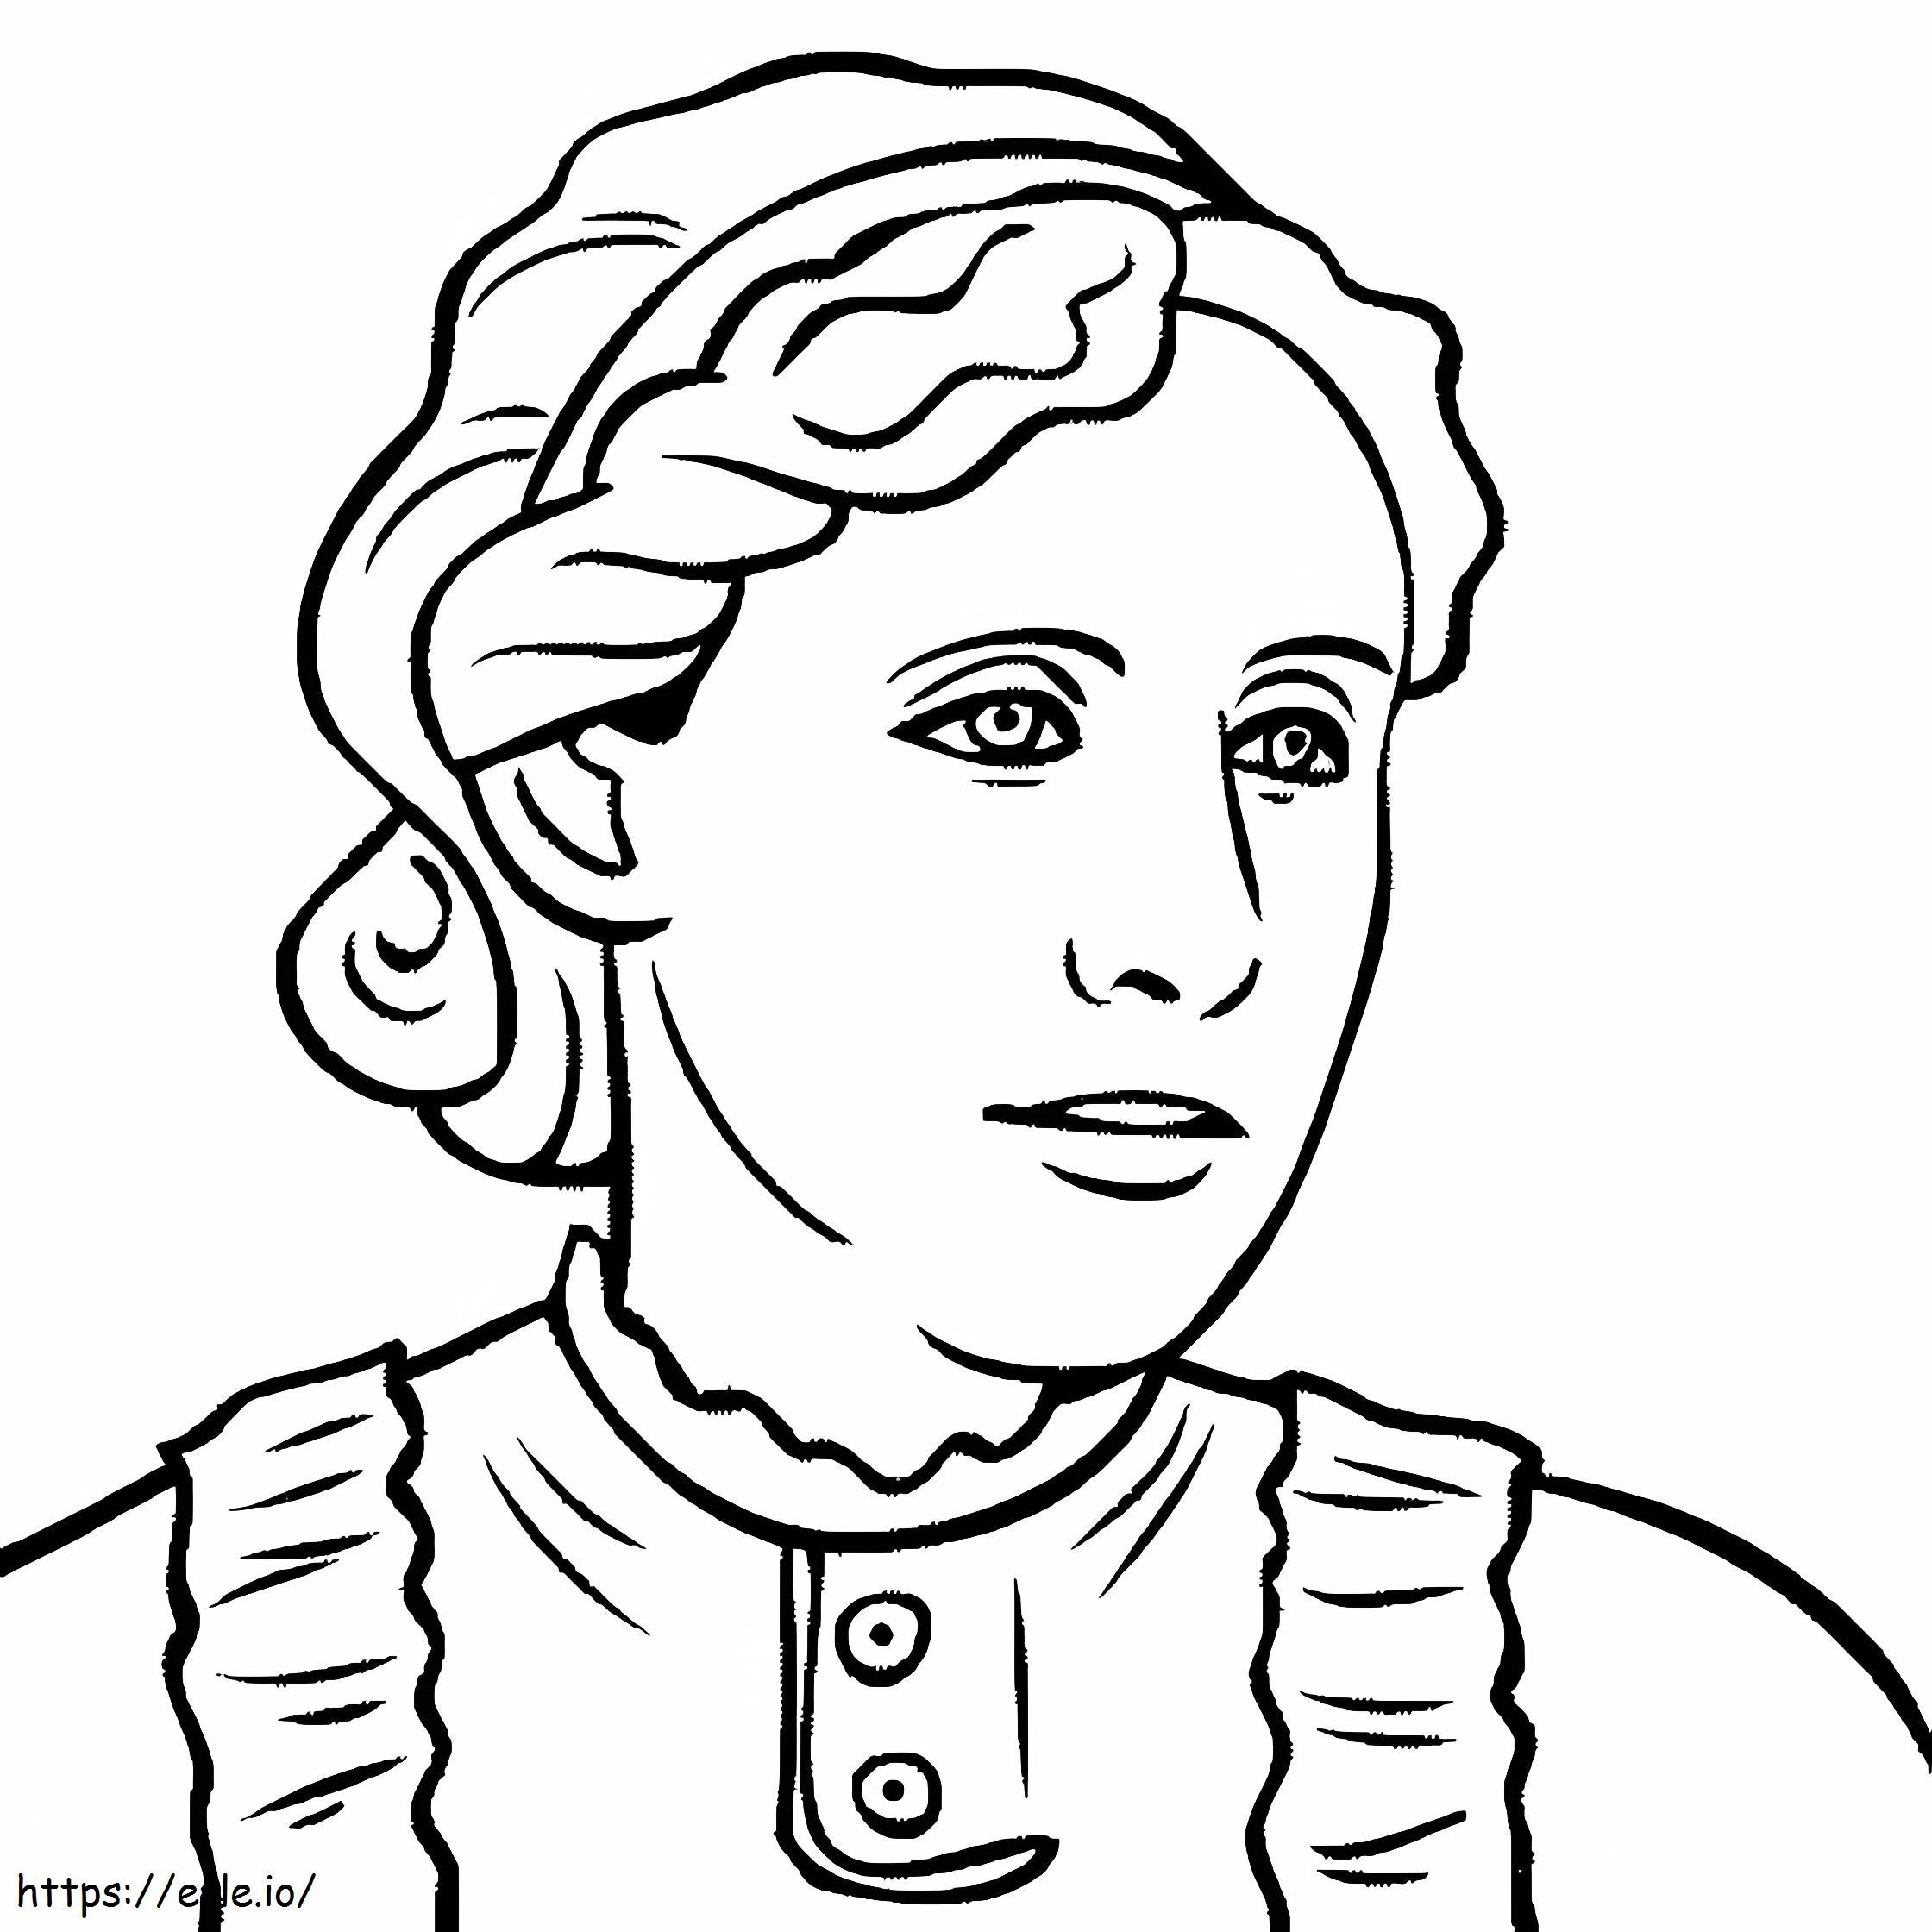 Young Helen Keller coloring page